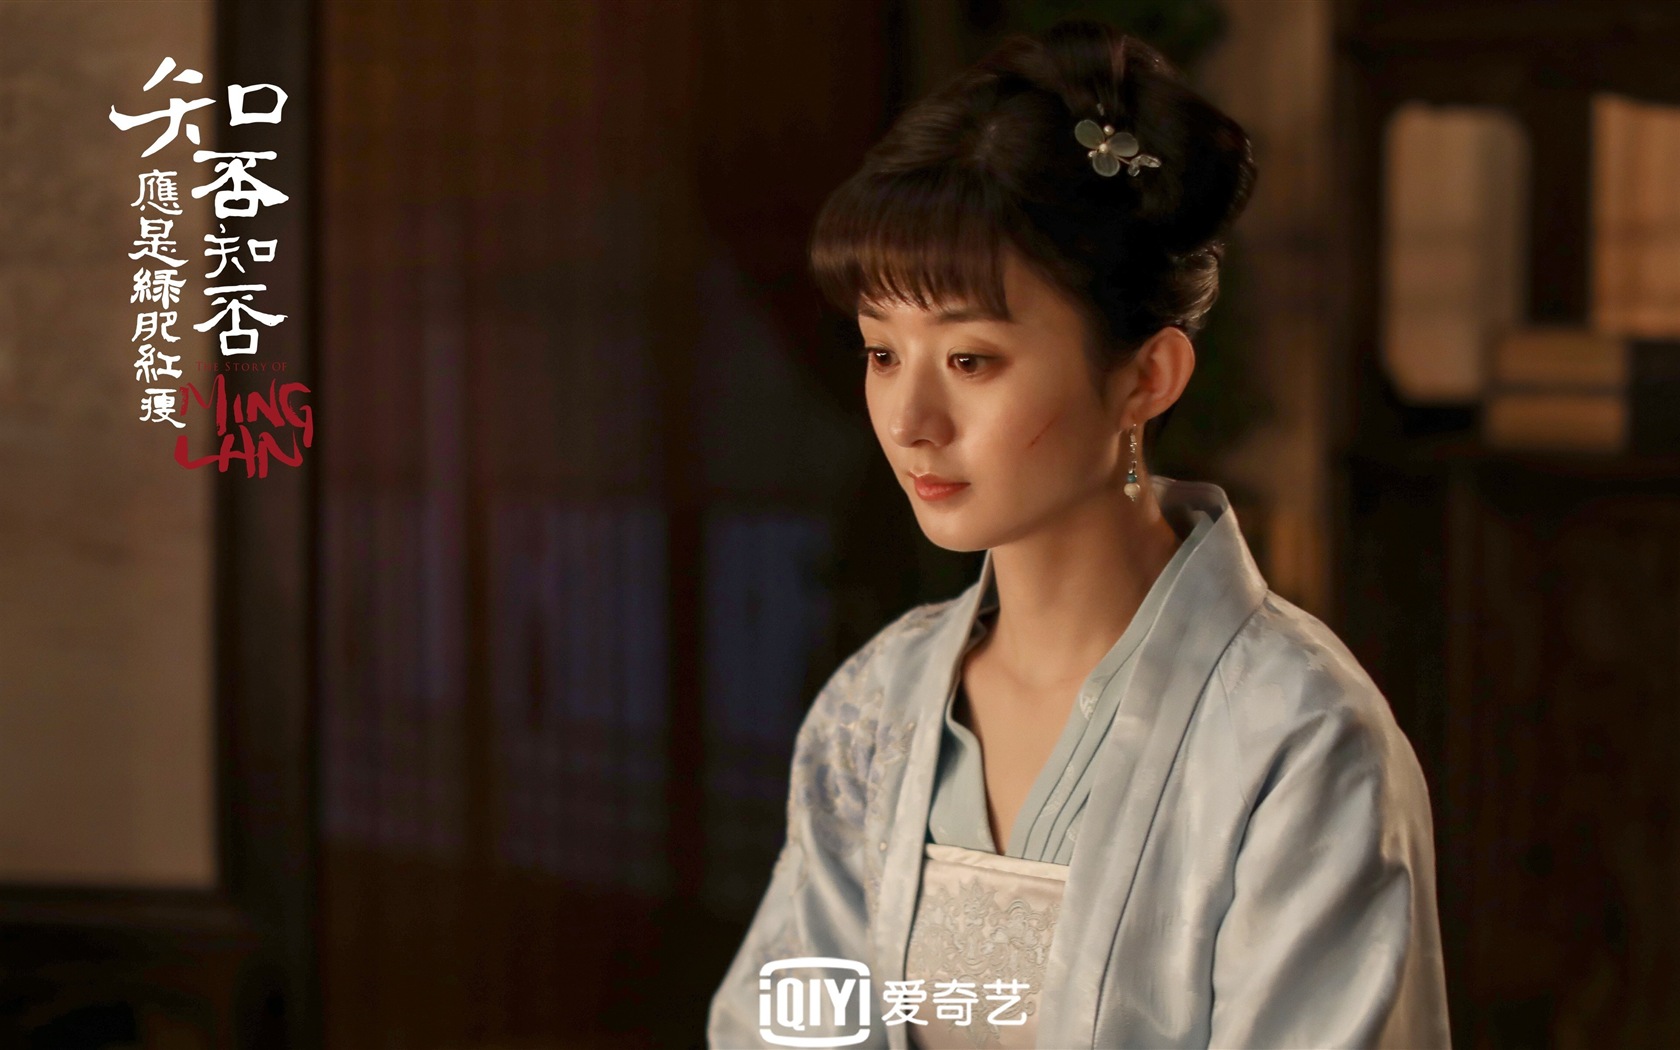 The Story Of MingLan, TV series HD wallpapers #36 - 1680x1050